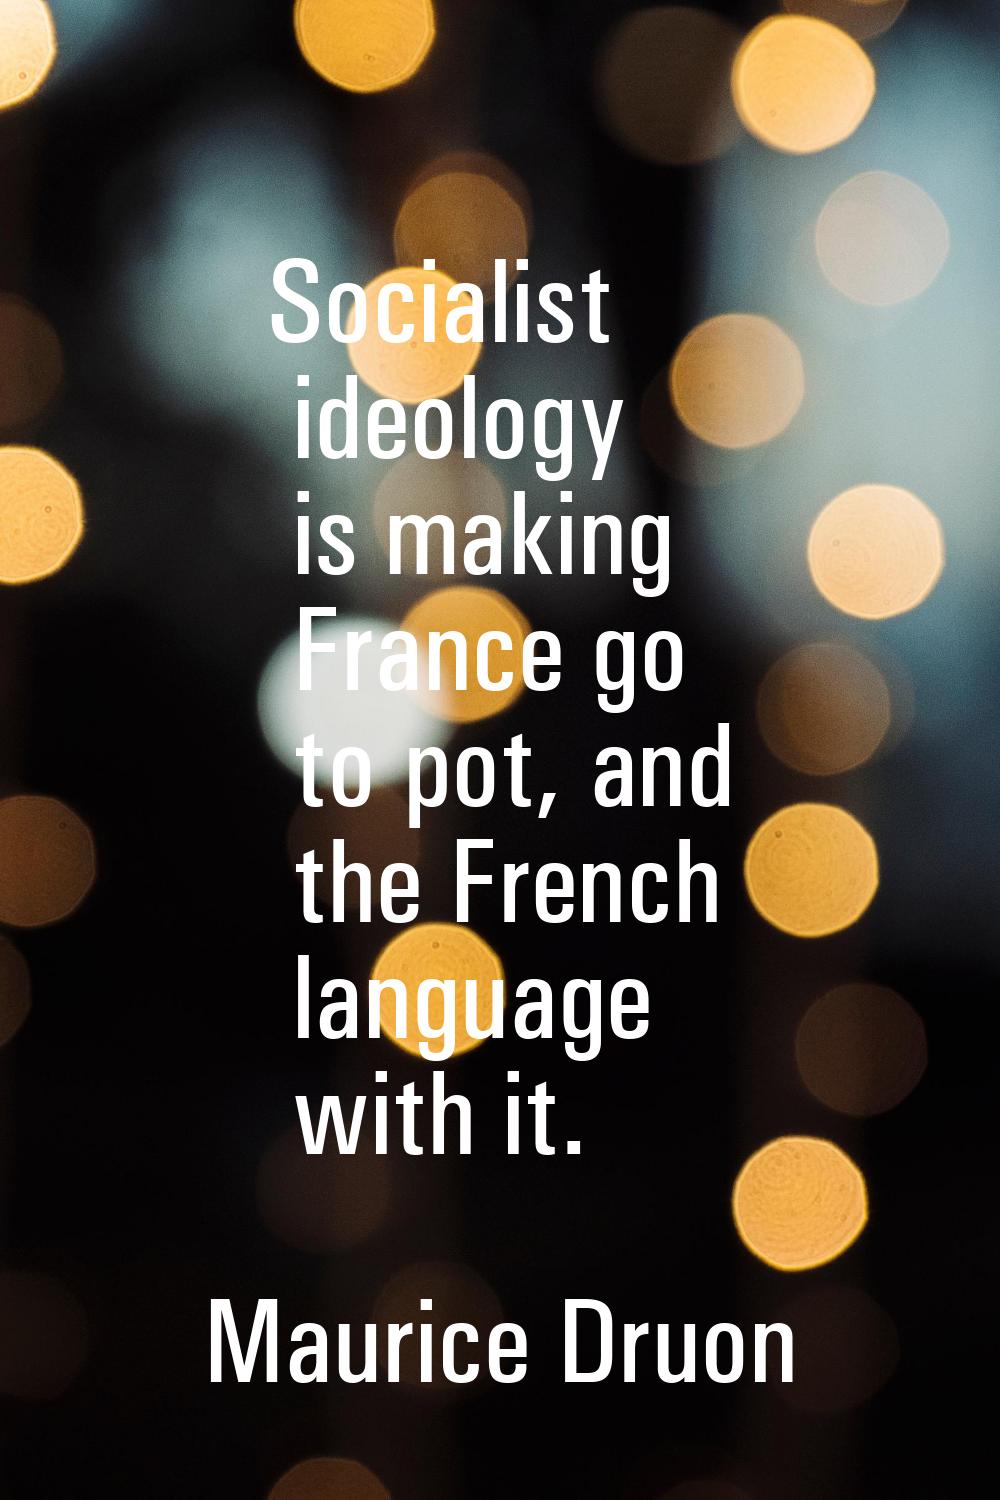 Socialist ideology is making France go to pot, and the French language with it.